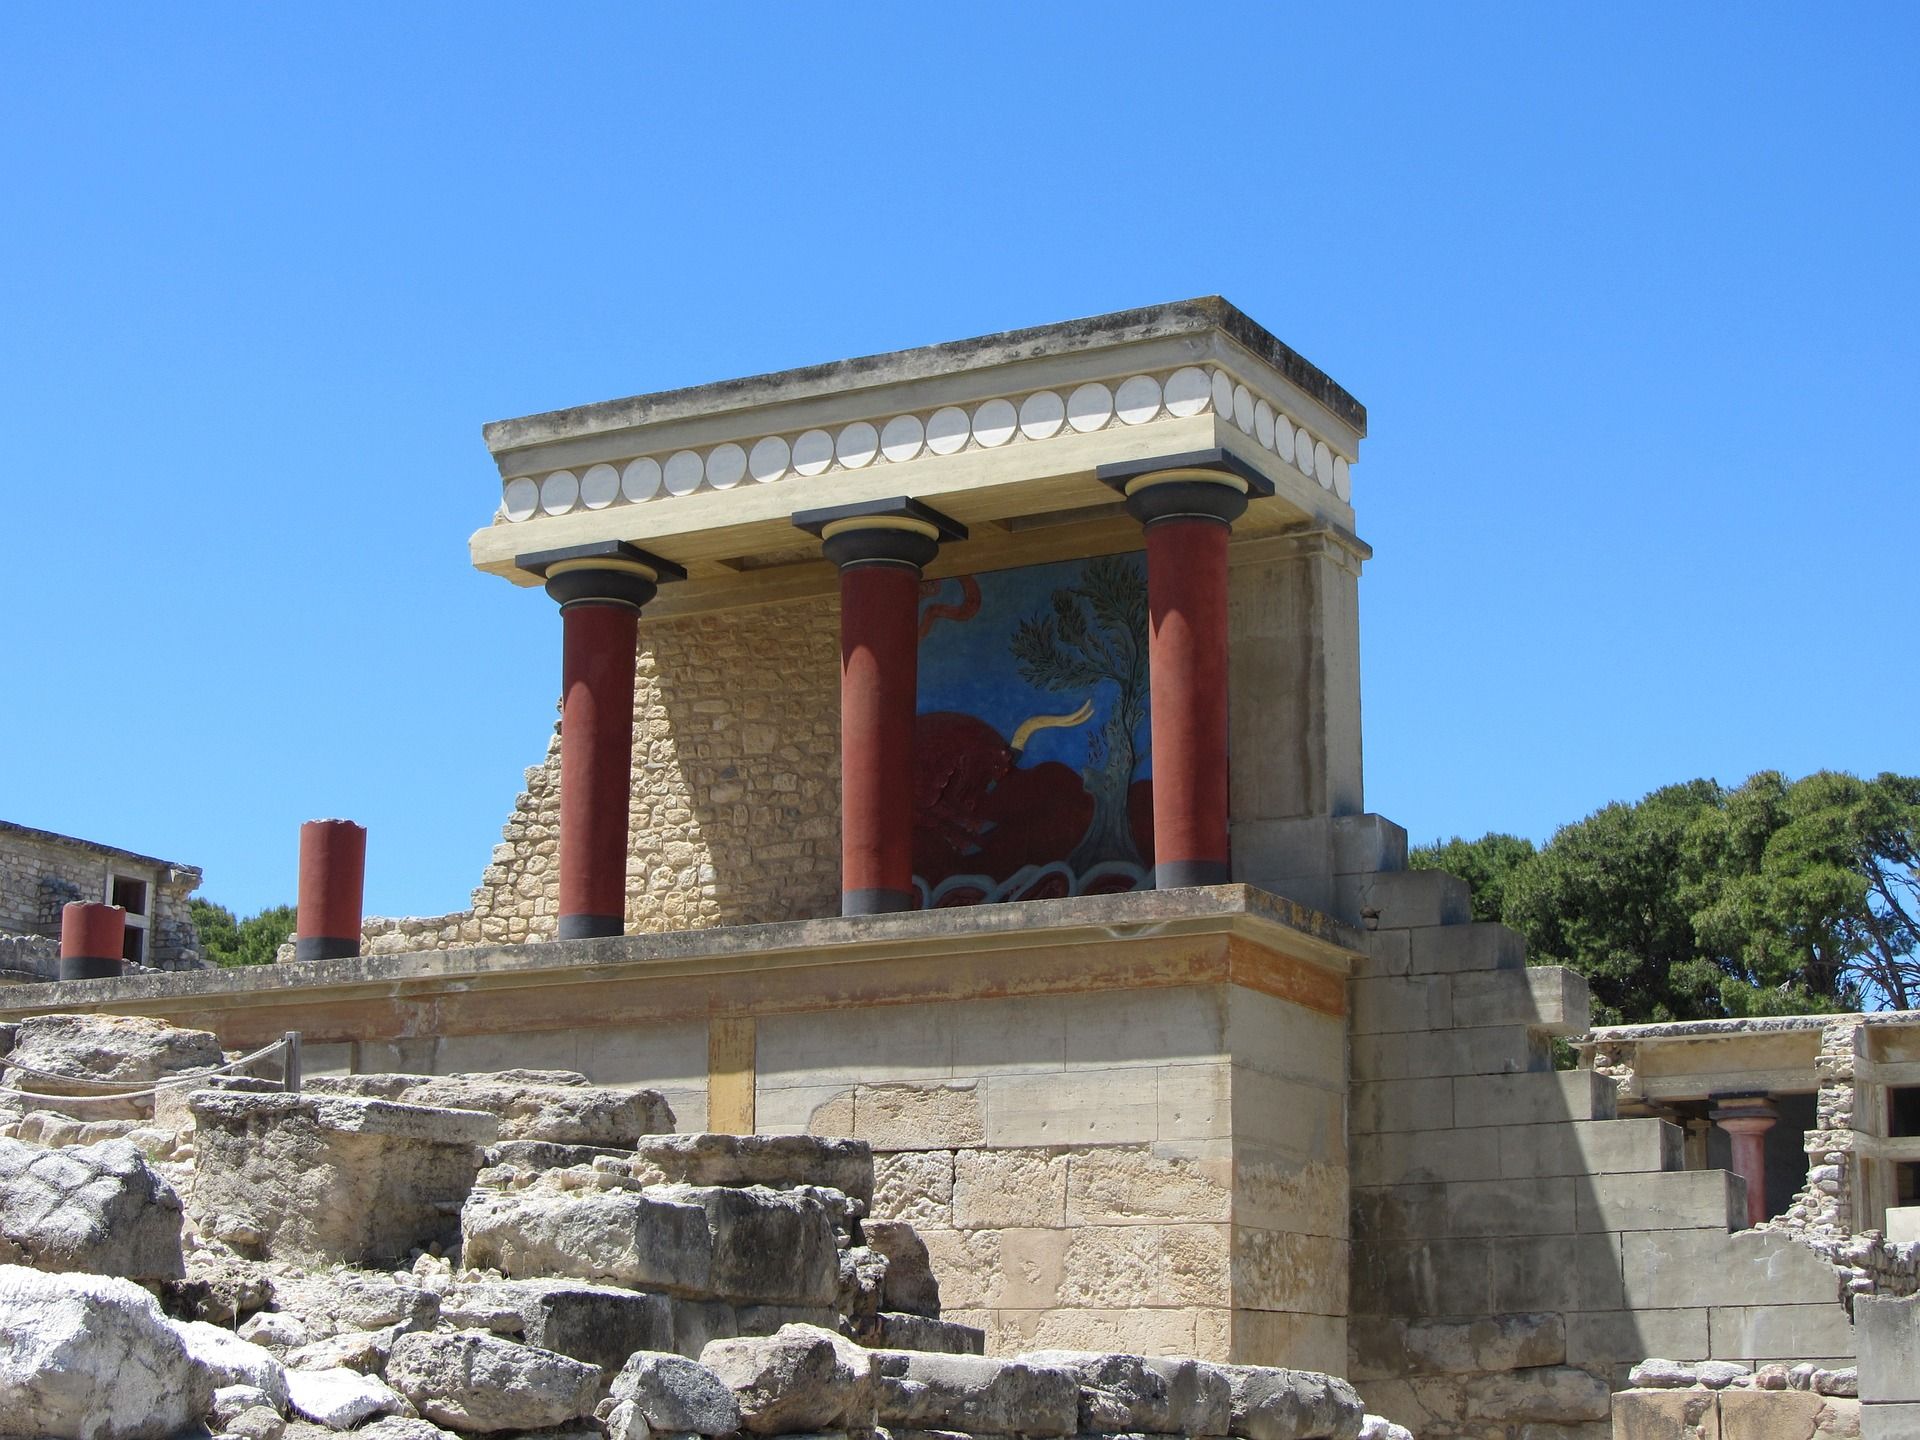 T beautiful red pillars of Knossos against the blue of the sky, Crete, Greece